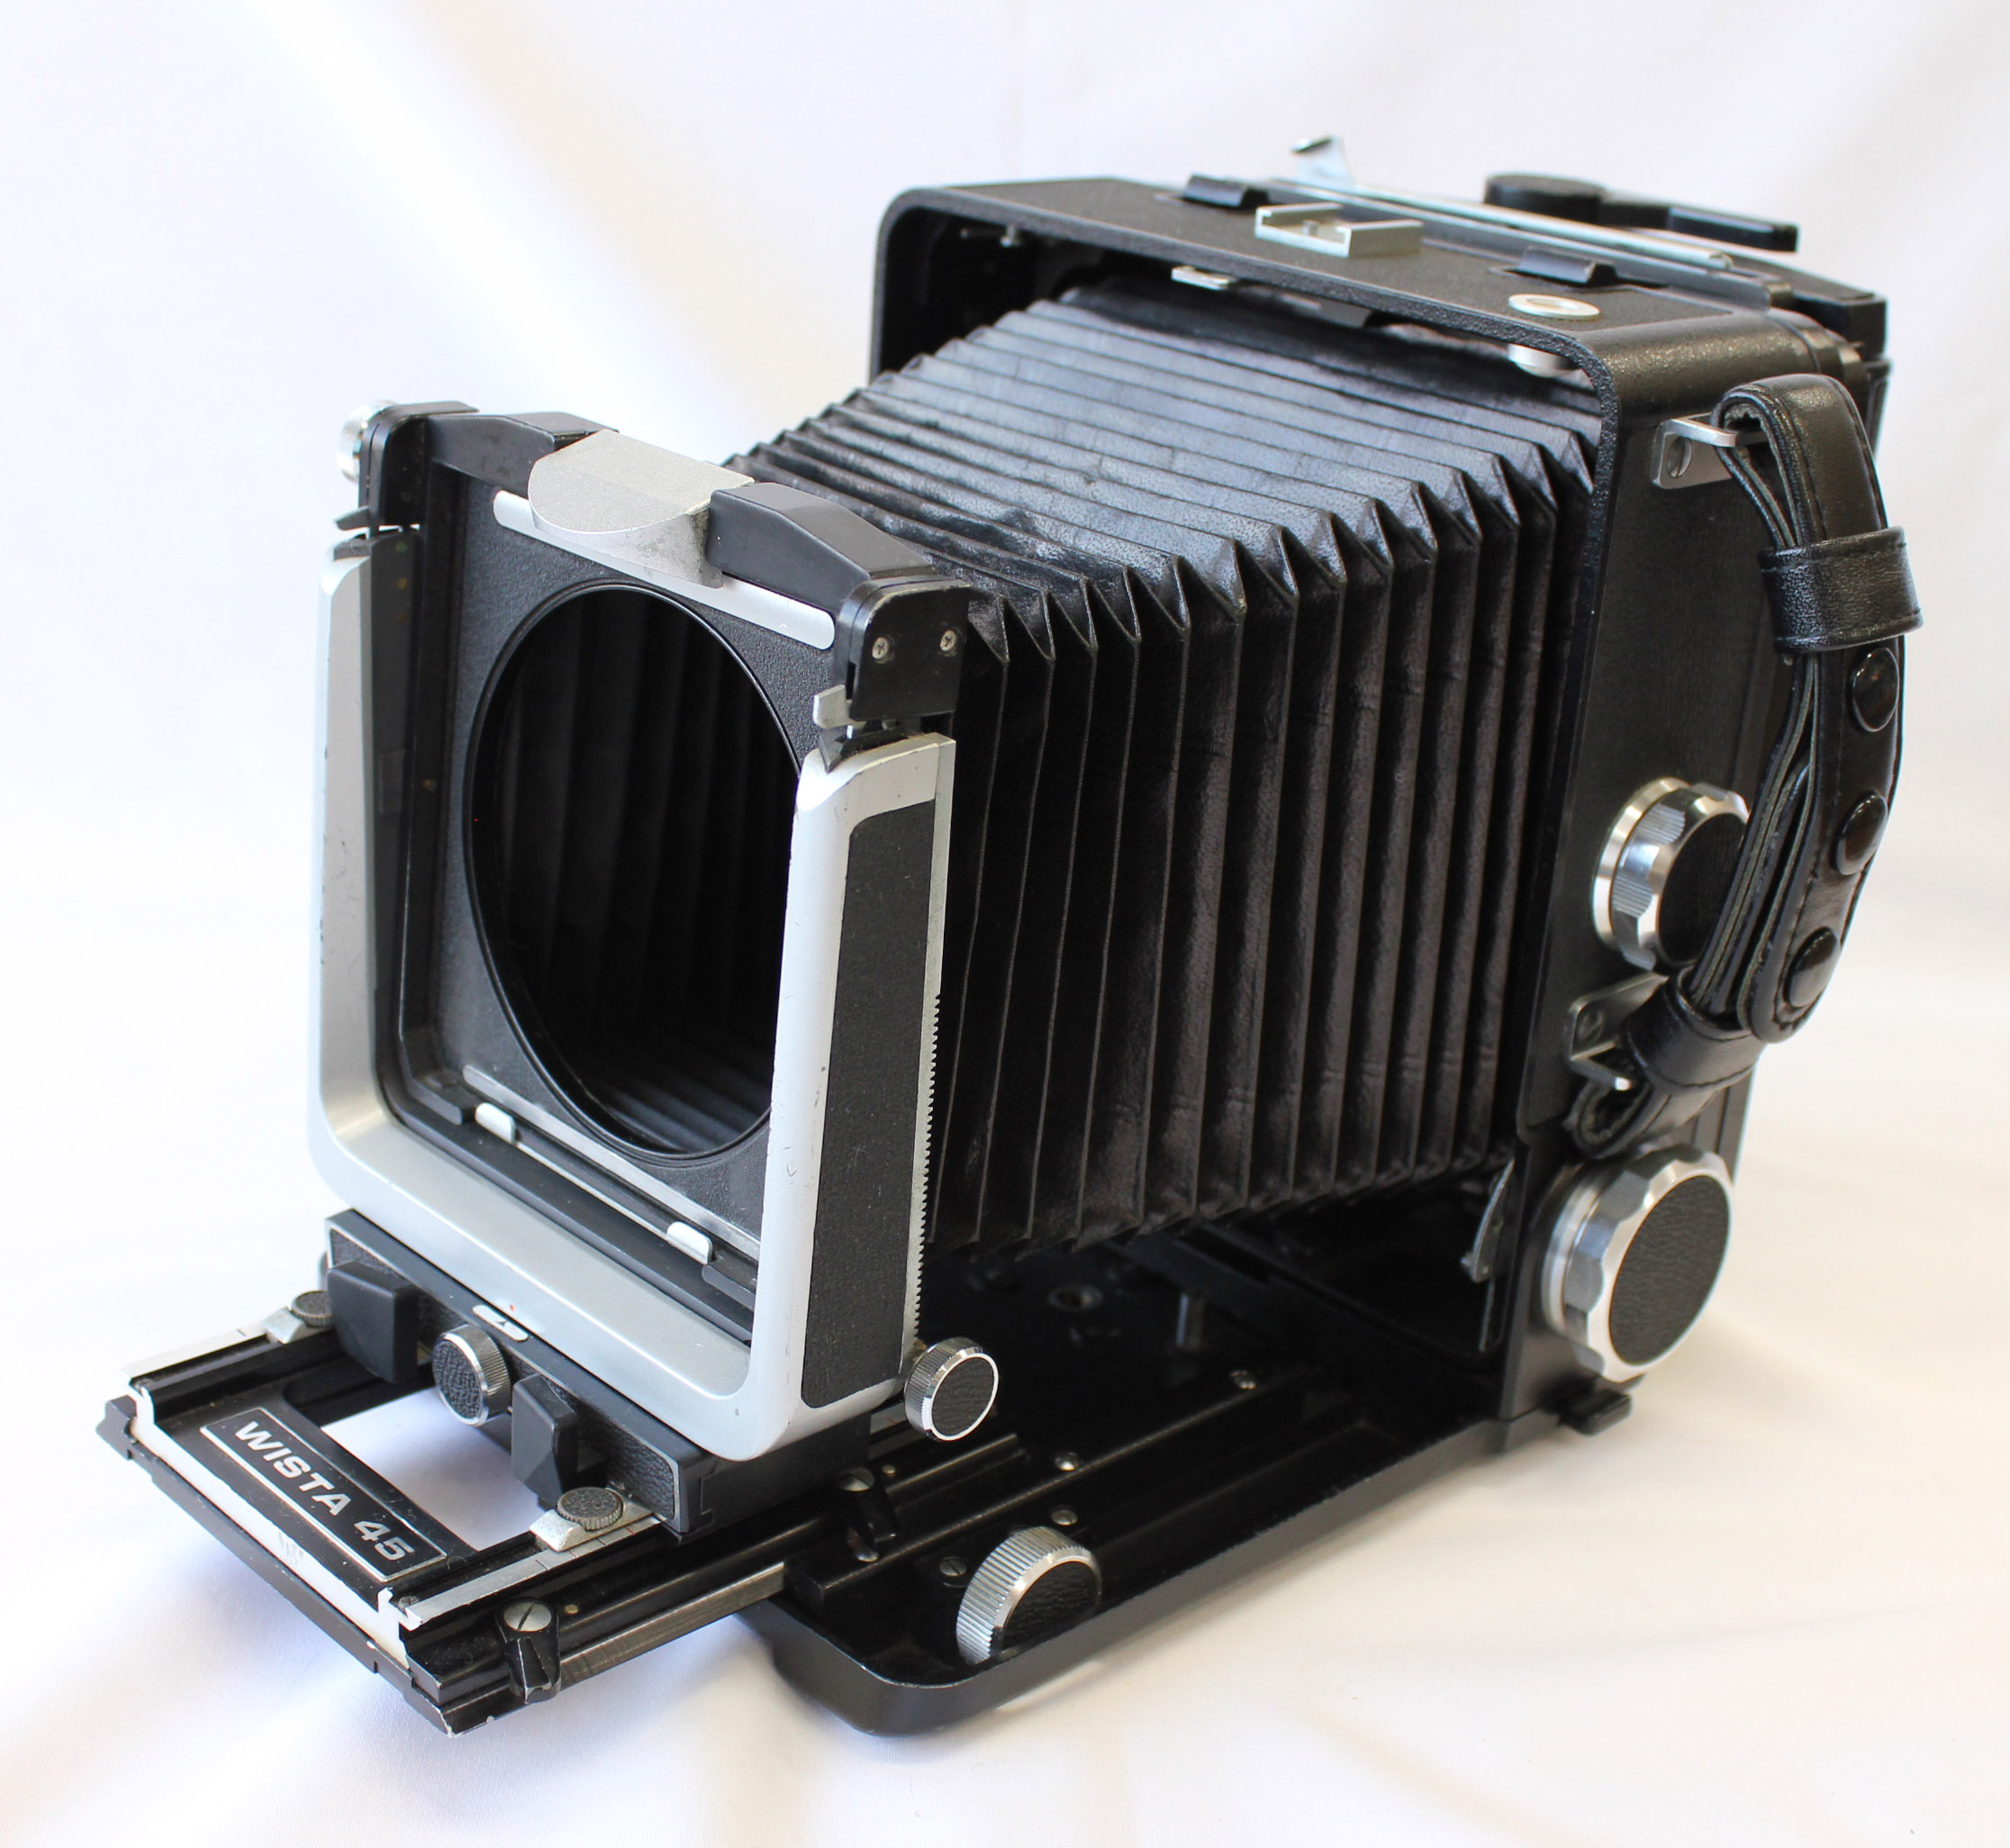 [Exc++++] Wista 45 45D 4x5 Large Format Camera w/ 6x9 Roll FIlm Holder & Quick Roll Slider from Japan